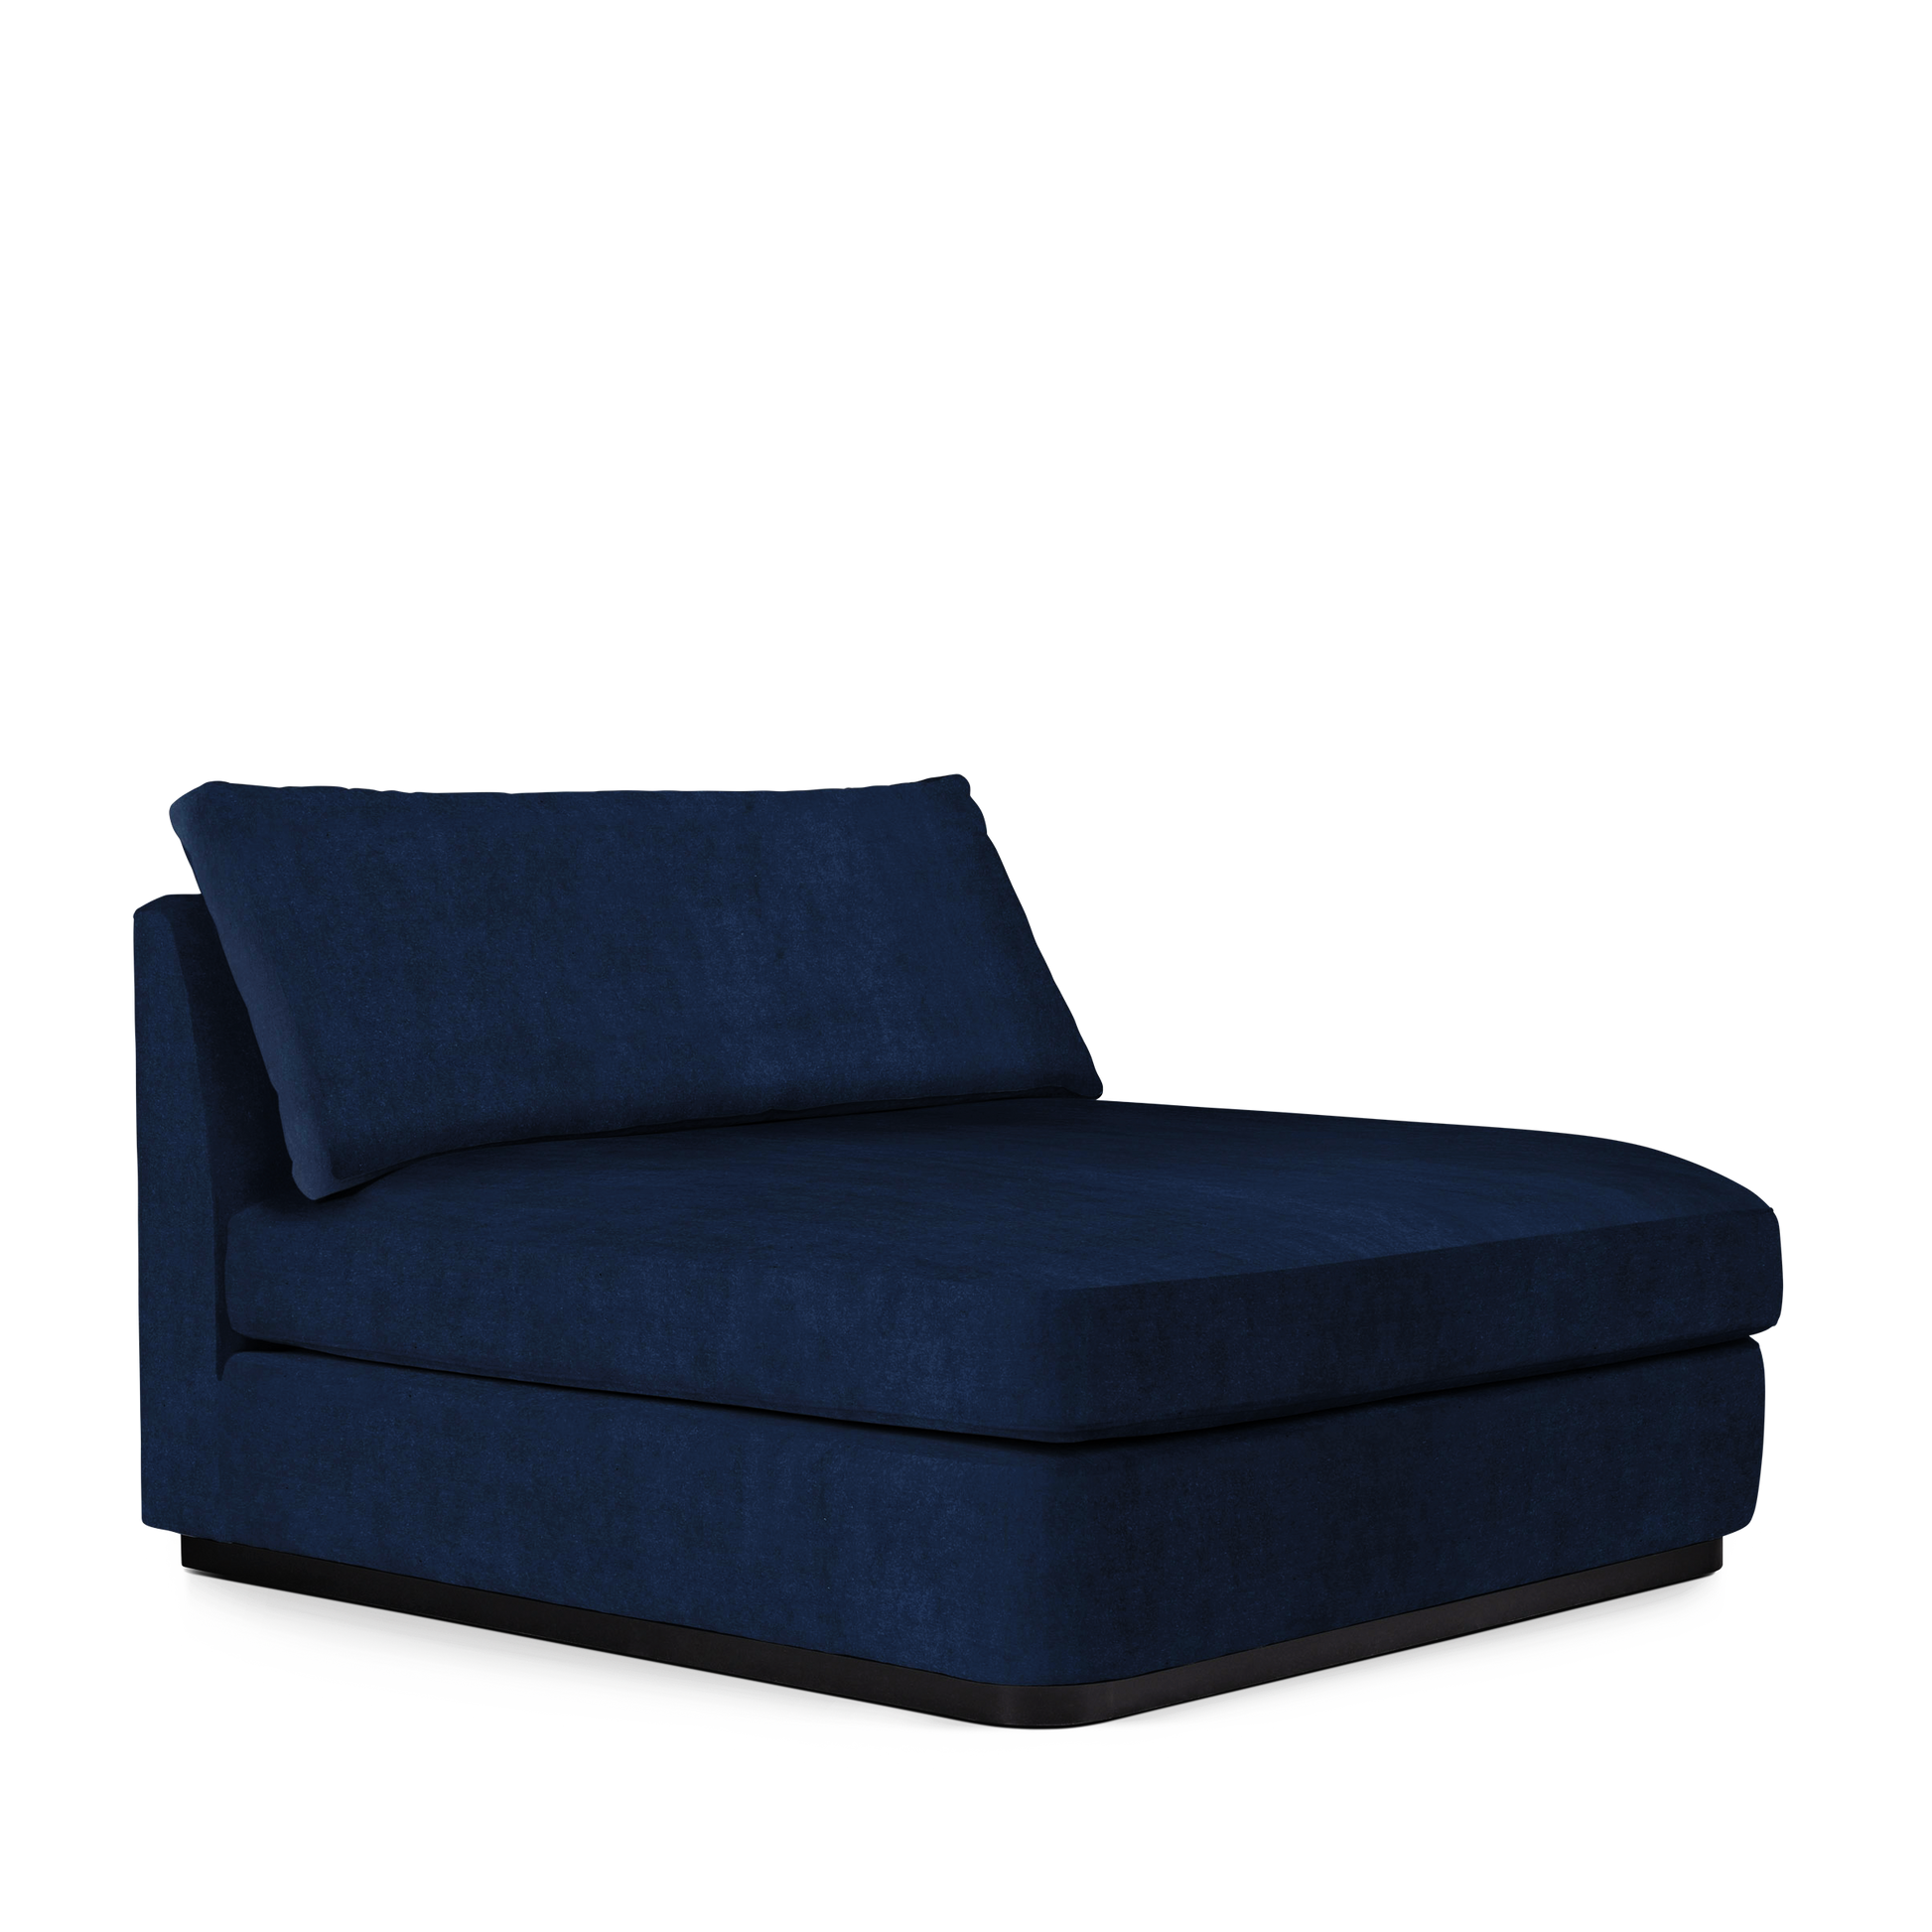 CALMA Lounge Bed with London dark blue textile 